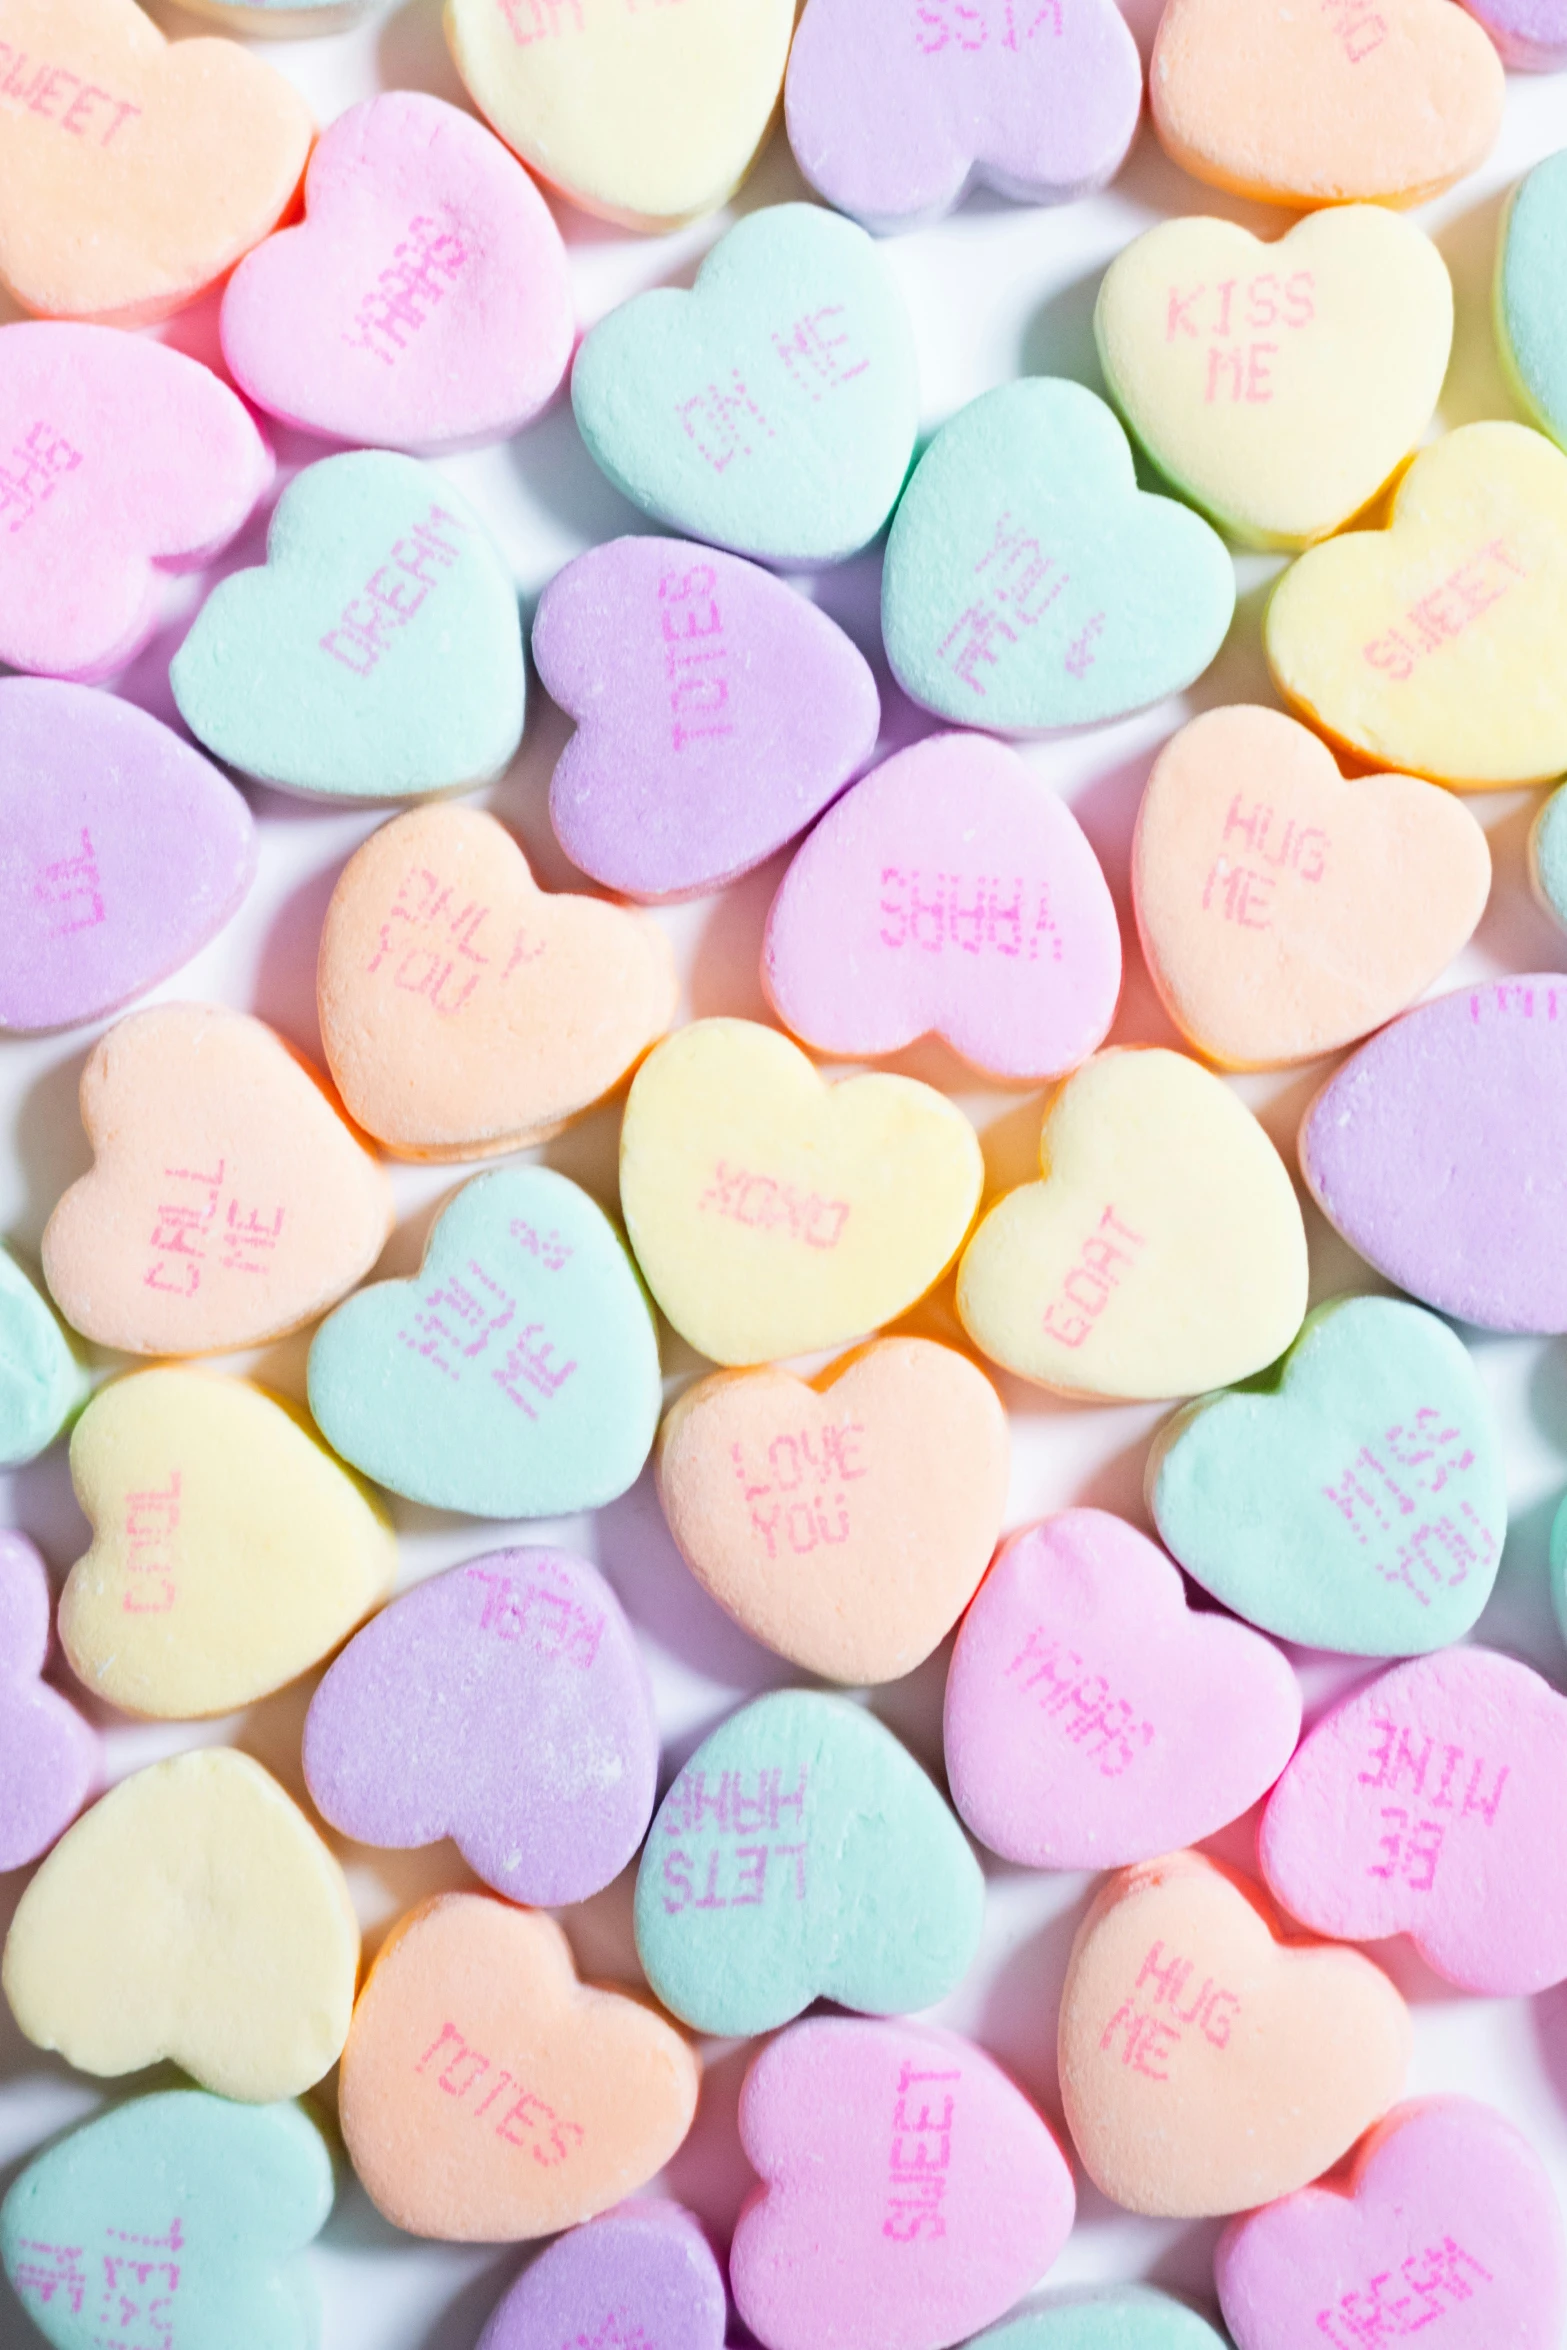 conversation hearts are colorful in size and color